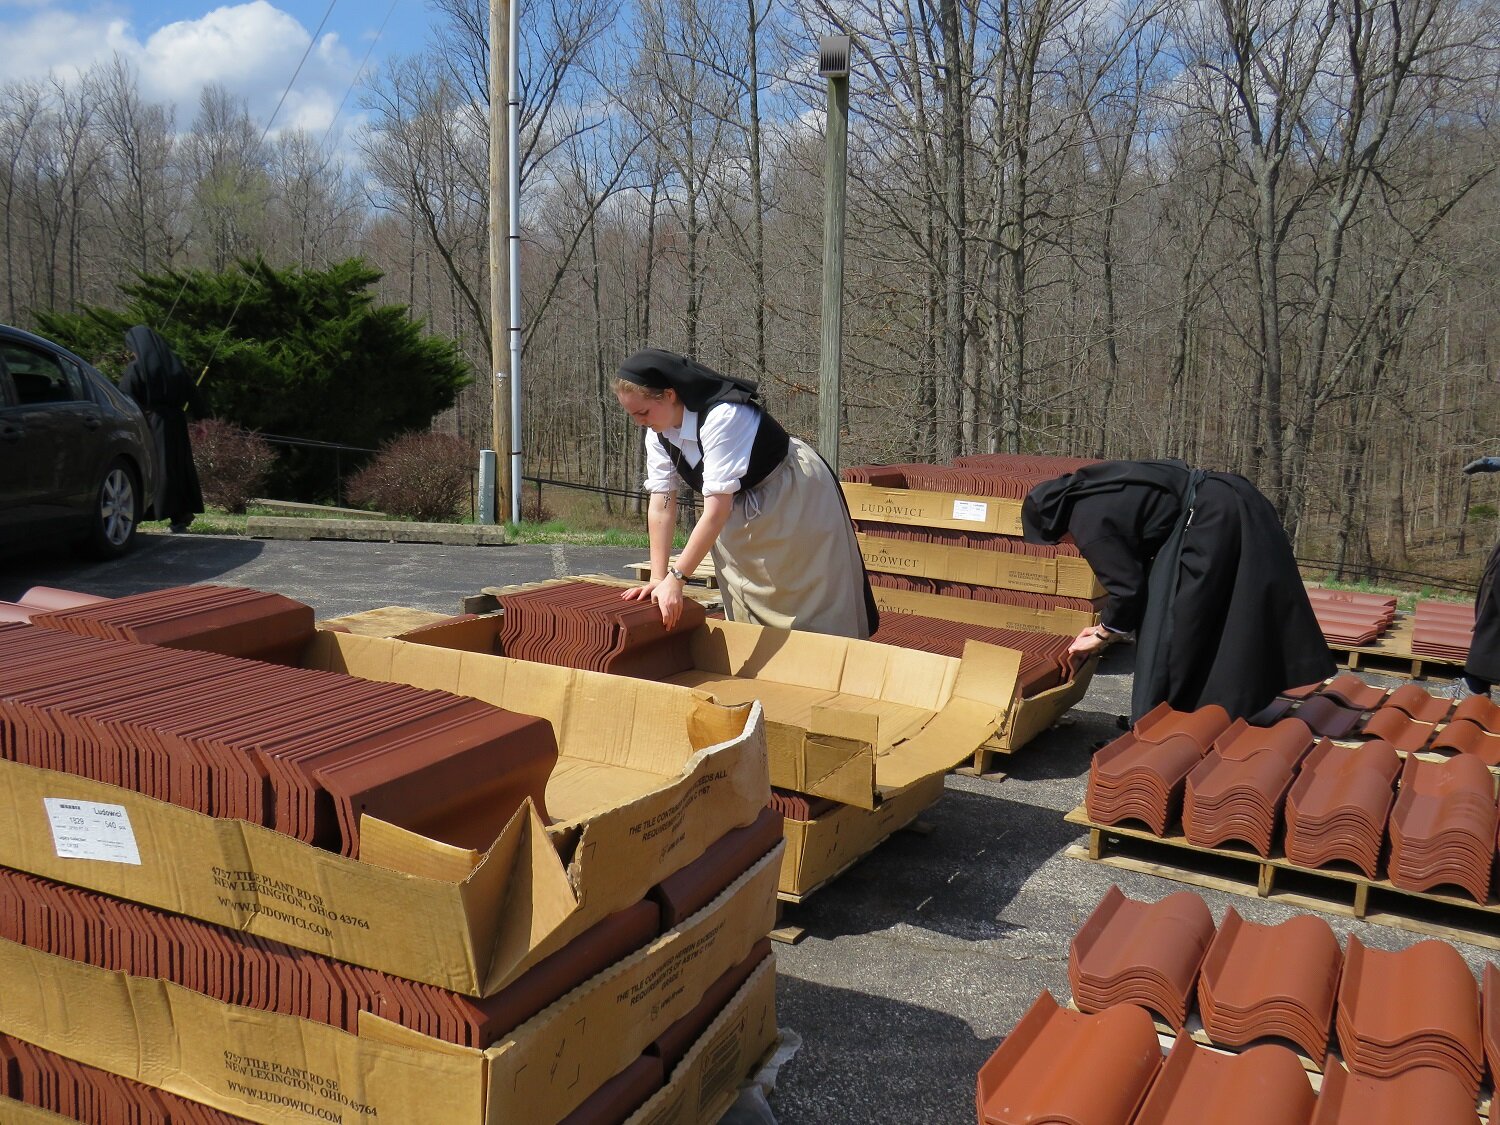  March 24 - the nuns are helping by blending the tiles onto pallets, so the roofers can stay on the roof! 